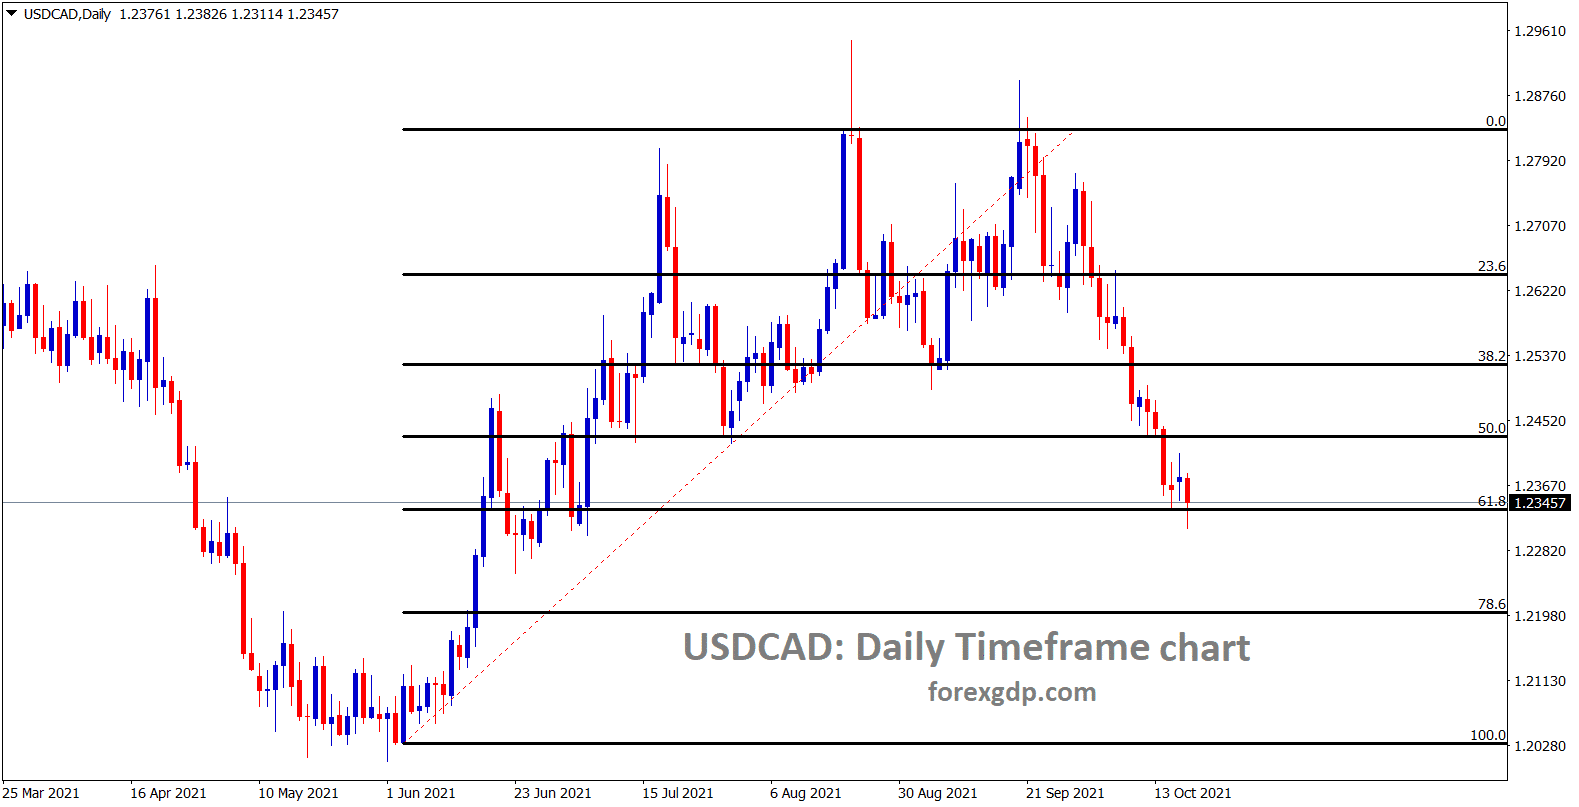 USDCAD is standing exactly at the 61.8 retracement level wait for the reversal or breakout